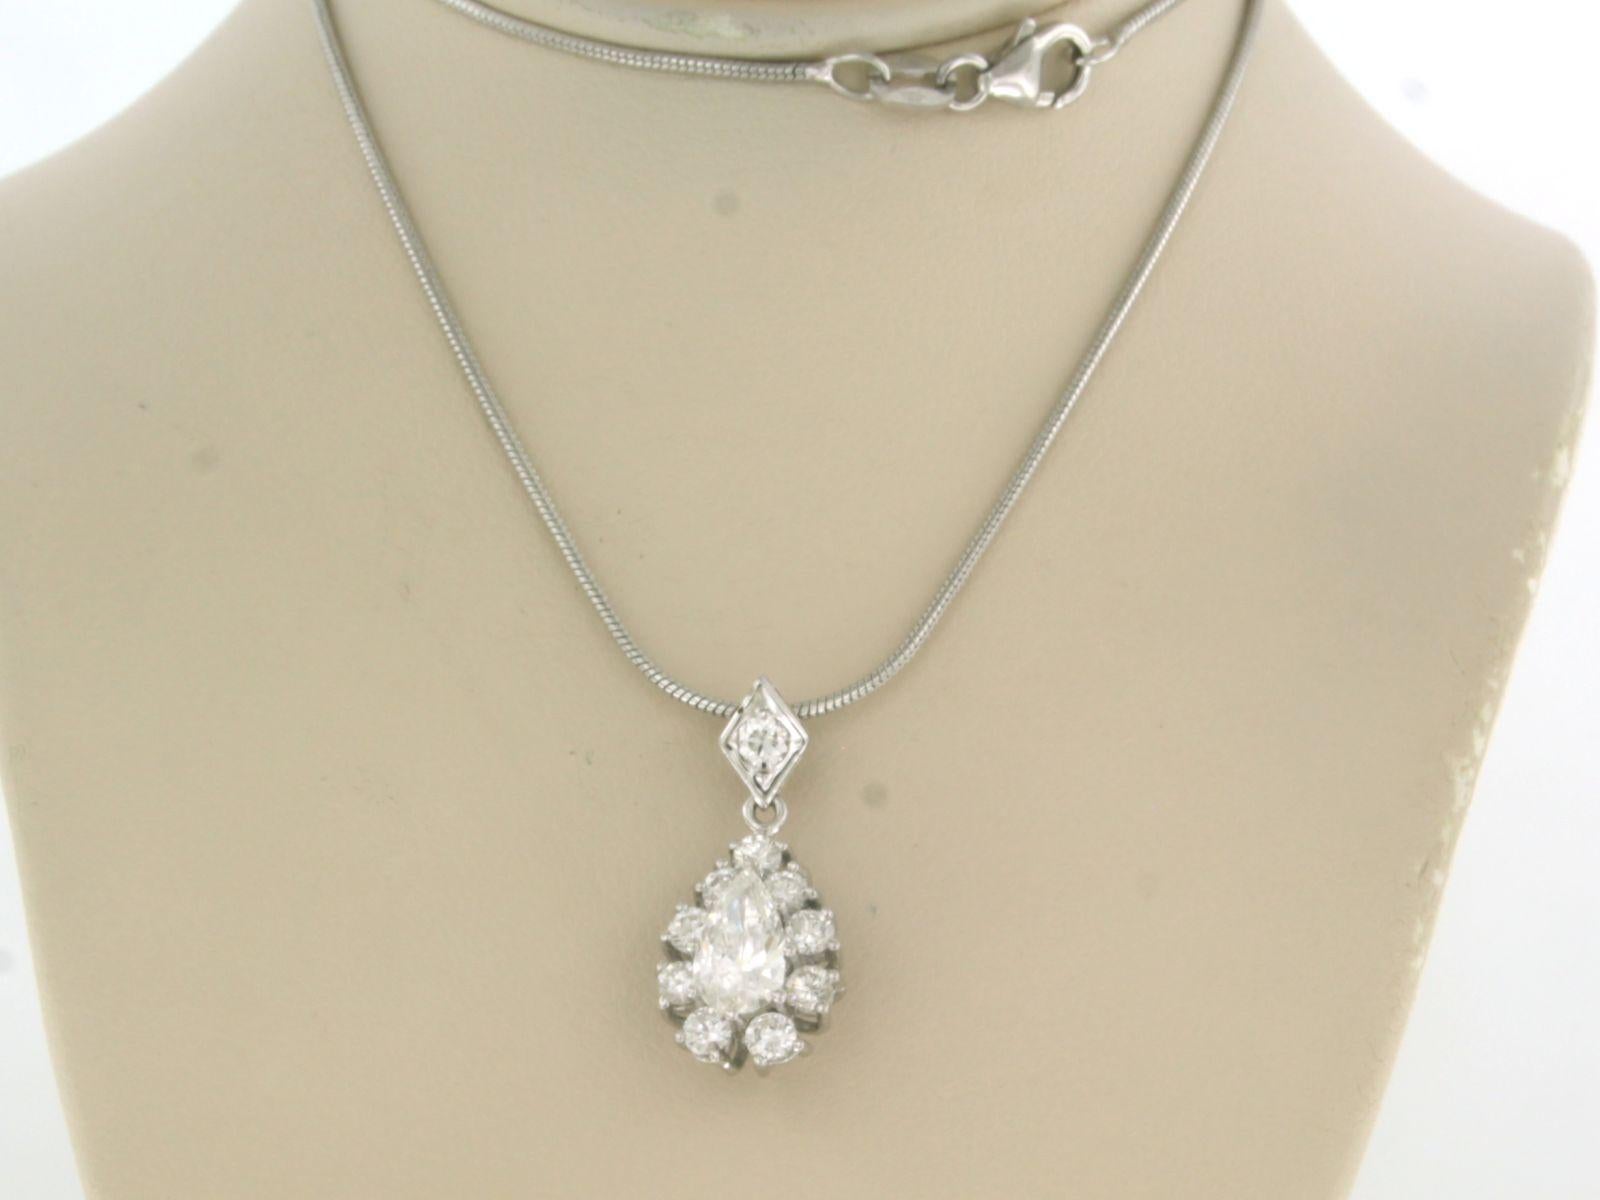 14k white gold necklace with pendant set with a pear-shaped cut diamond in the center. 1.00ct - F/G - VS/SI and an entourage of brilliant cut diamonds up to. 0.75ct - F/G - VS/SI - 40 cm long

detailed description

the length of the necklace is 45